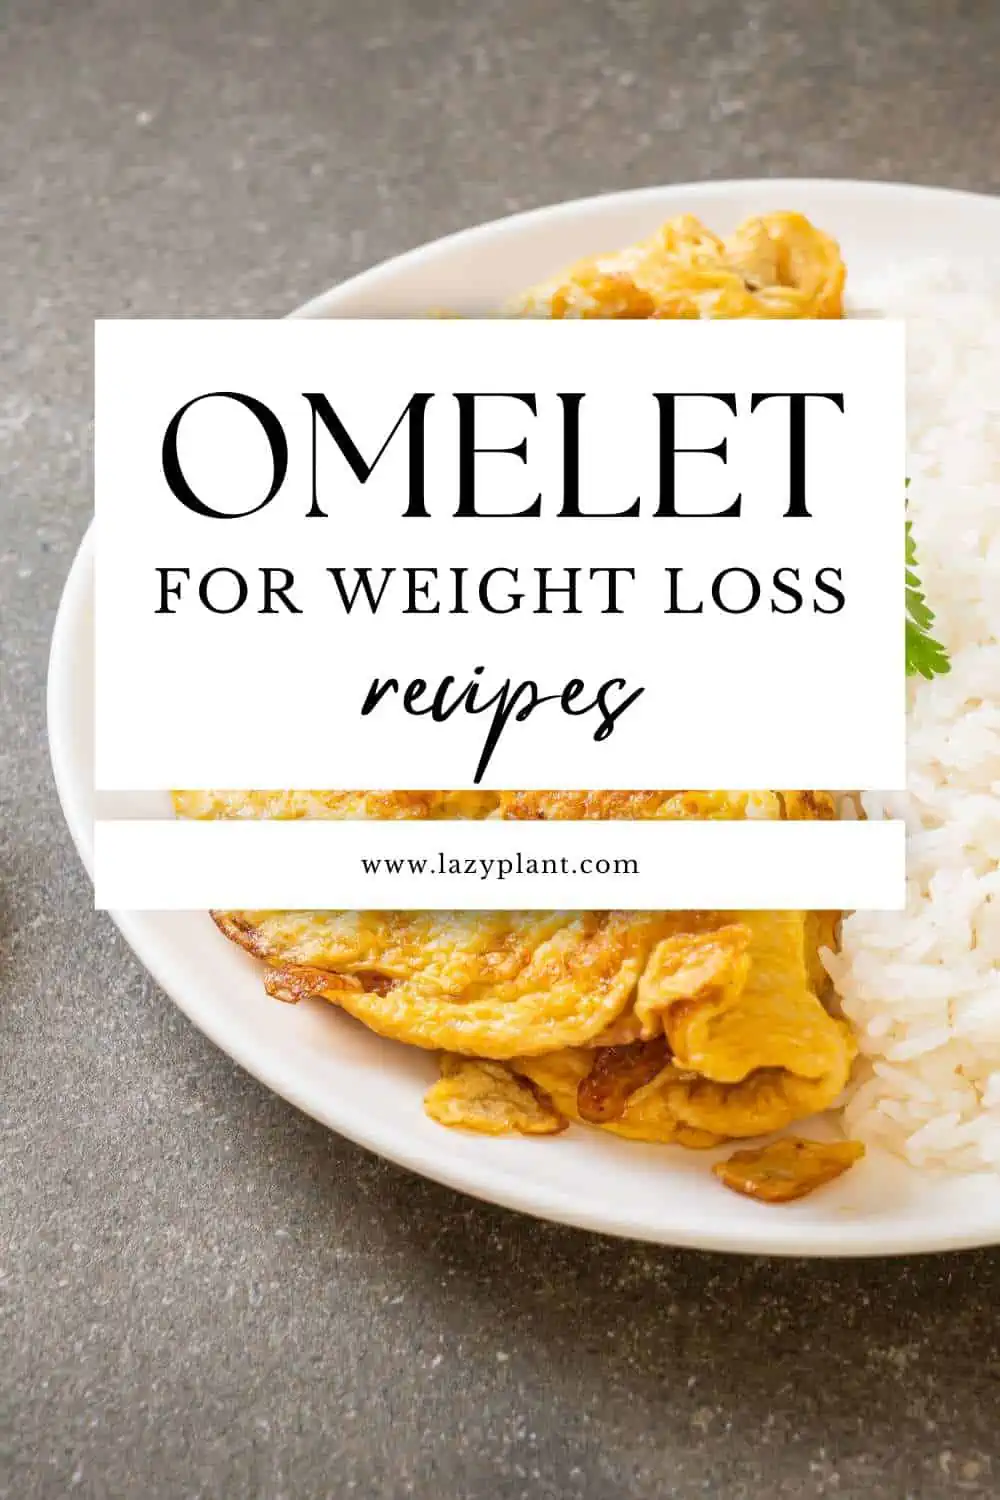 Easy protein-rich oats egg omelet recipes for weight loss.